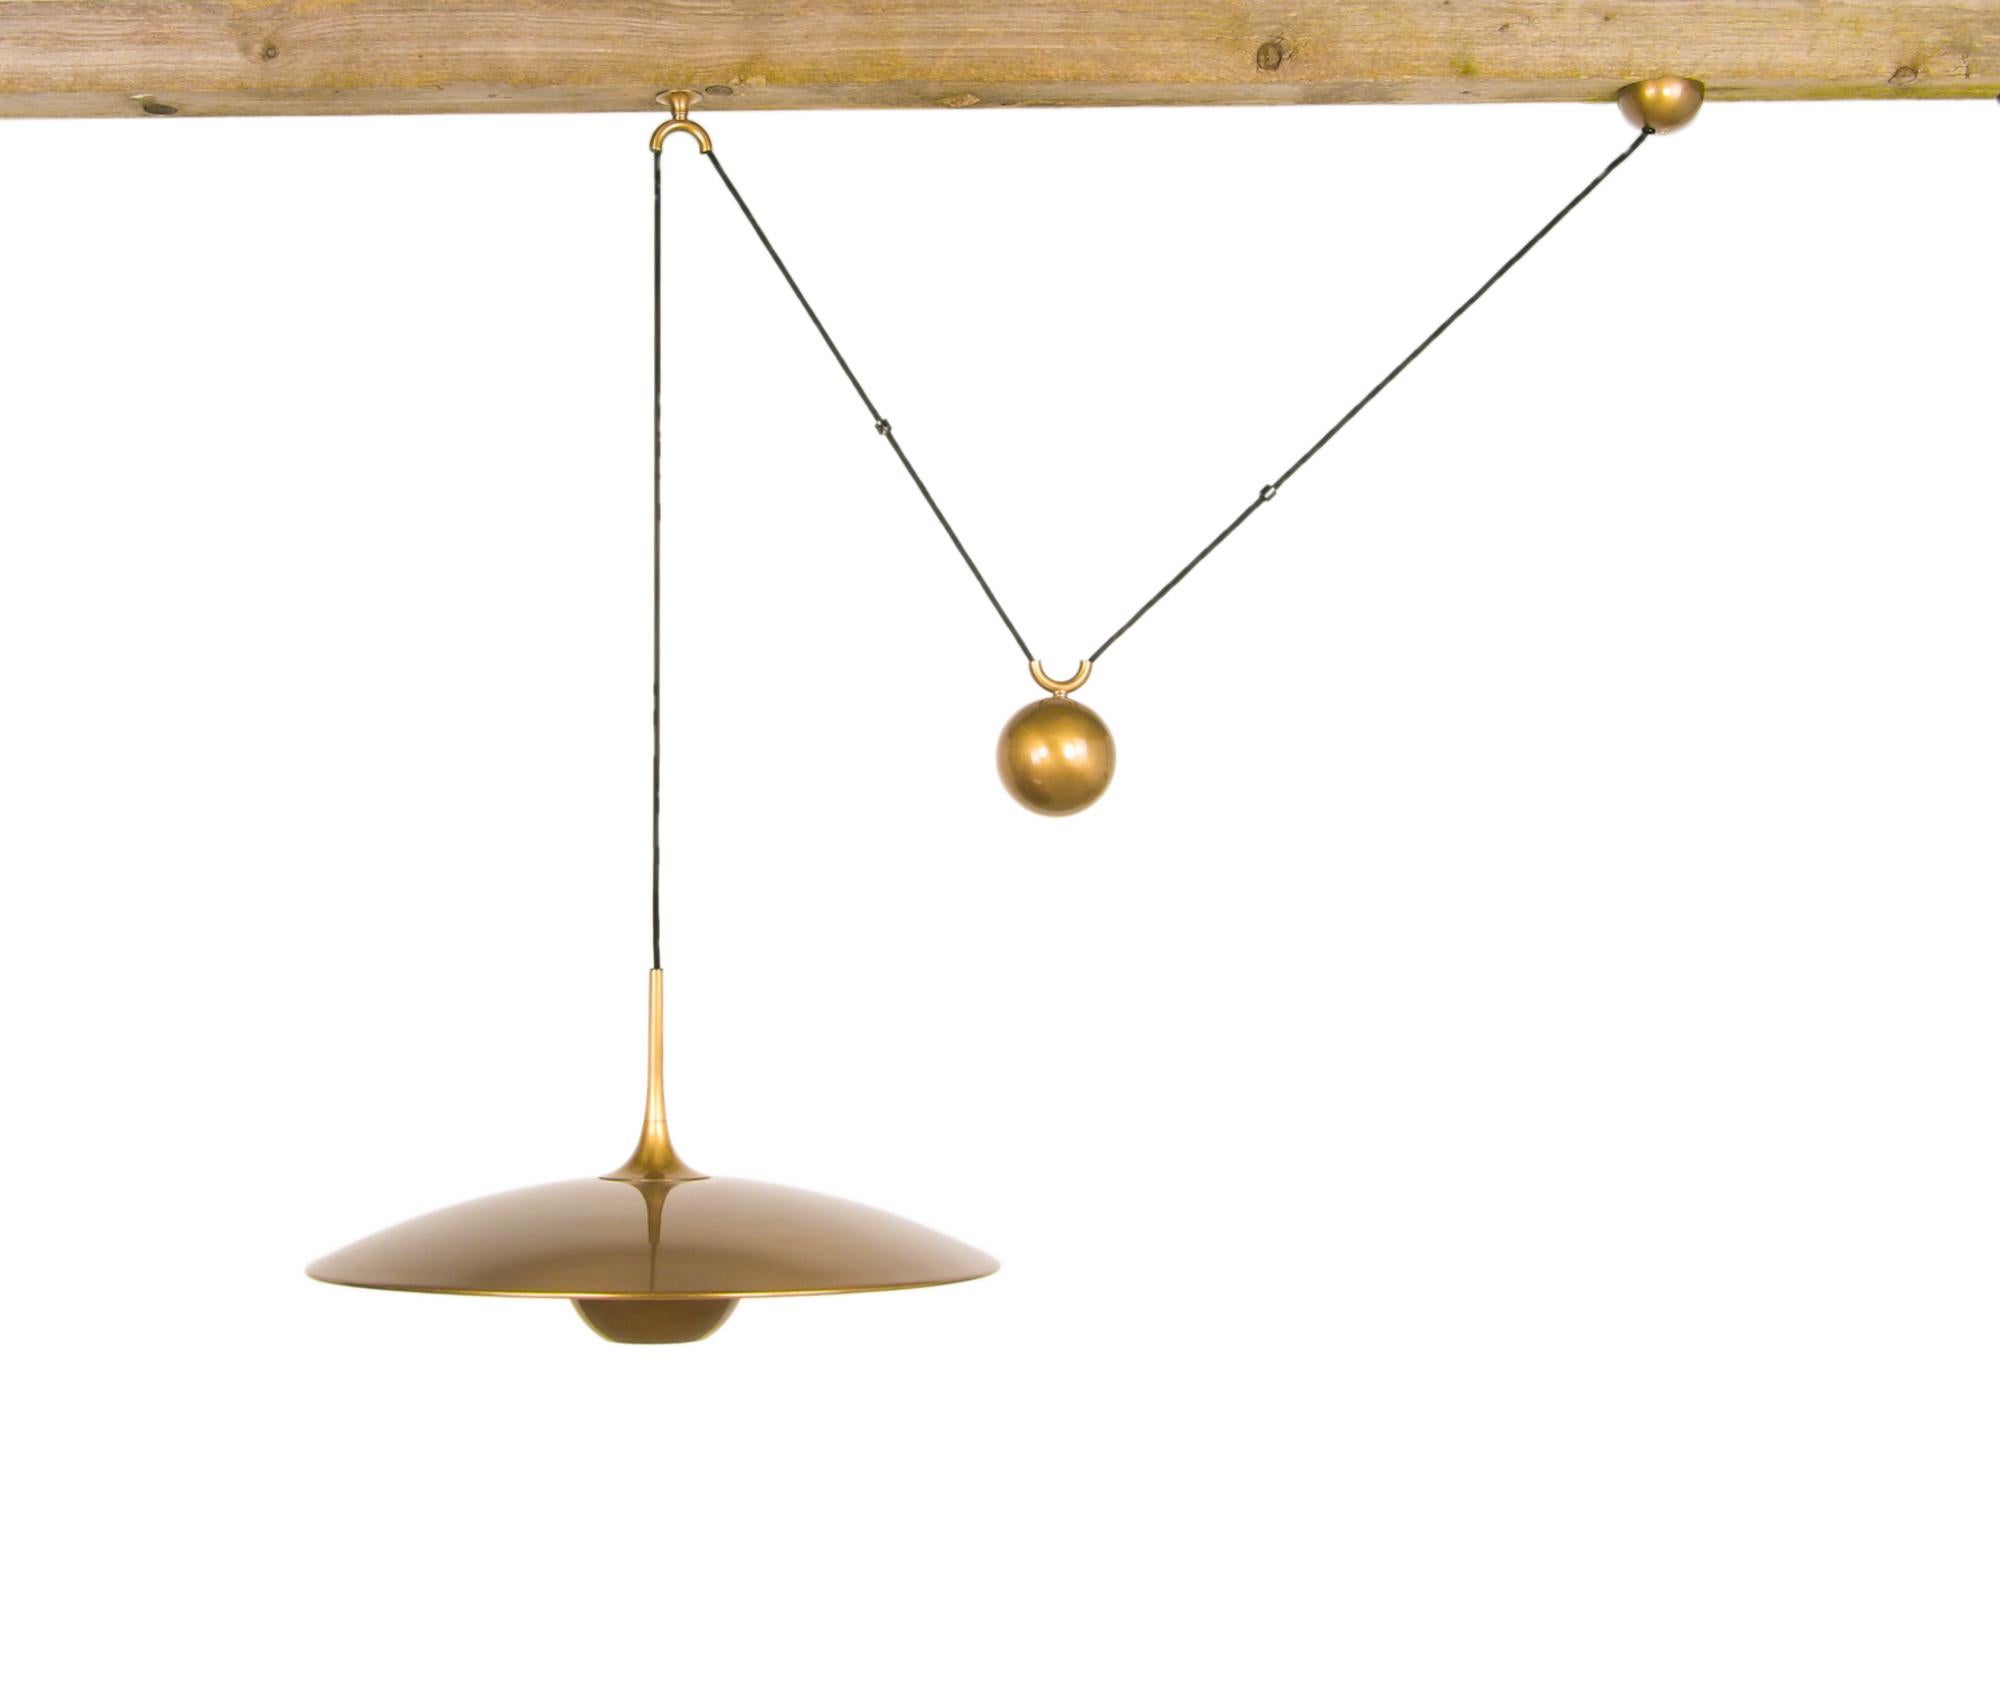 Adjustable Brass Pendant Lamp Onos 55 by Florian Schulz, Germany, 1970s For Sale 4